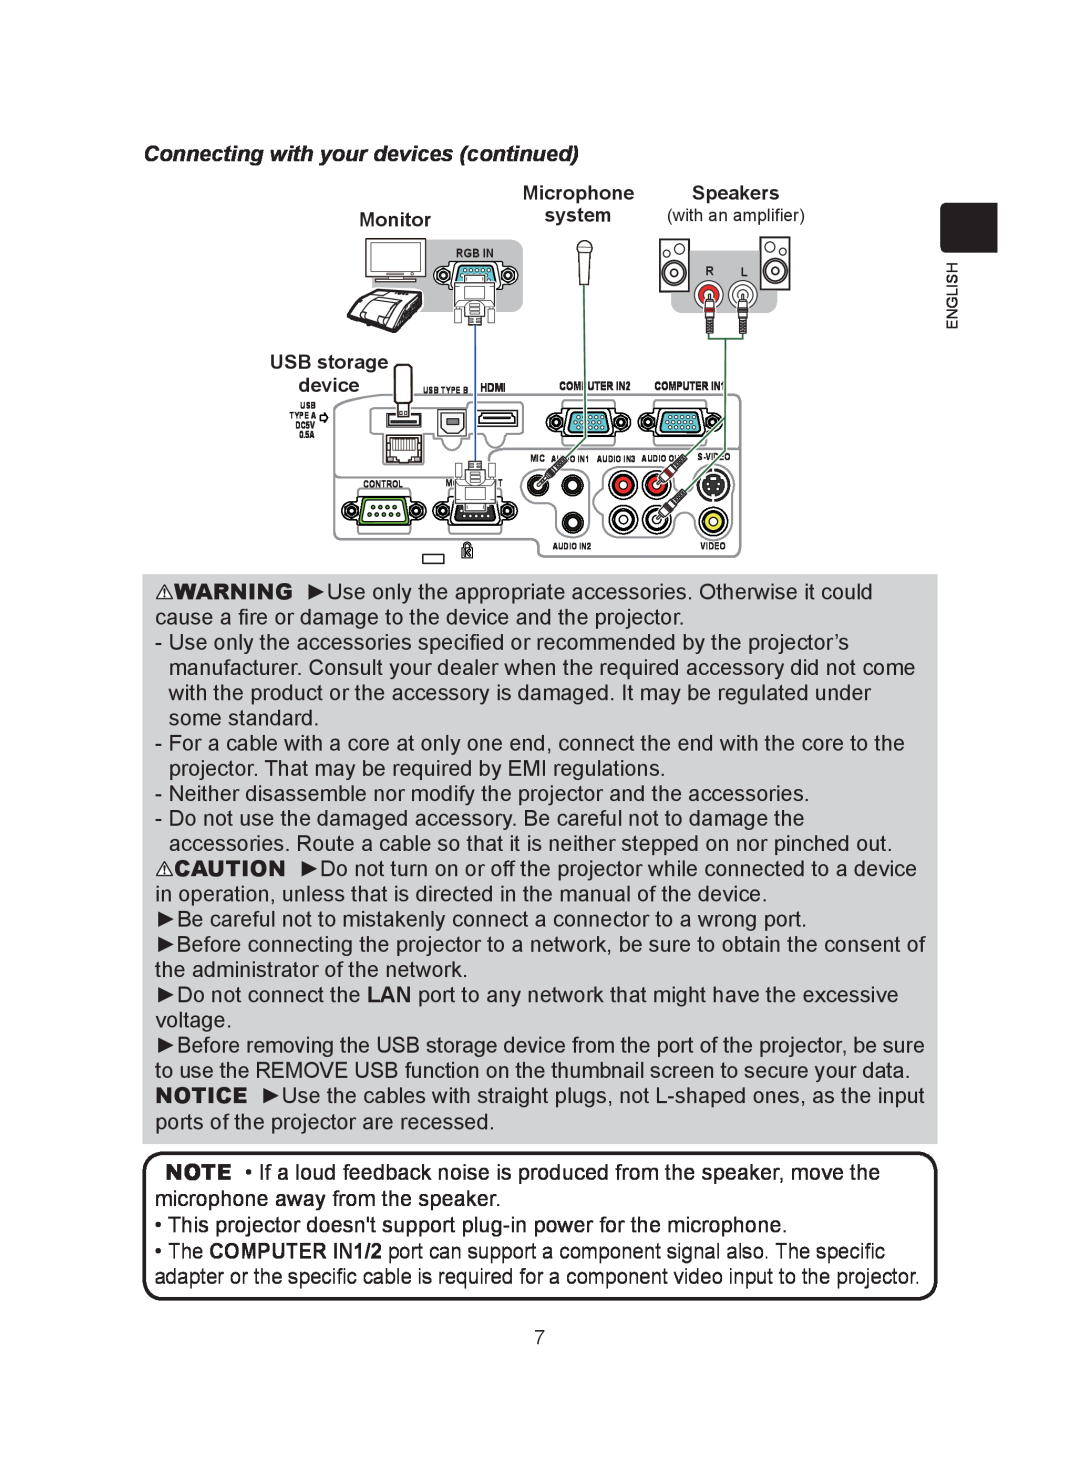 Dukane 8104HW user manual Connecting with your devices continued 